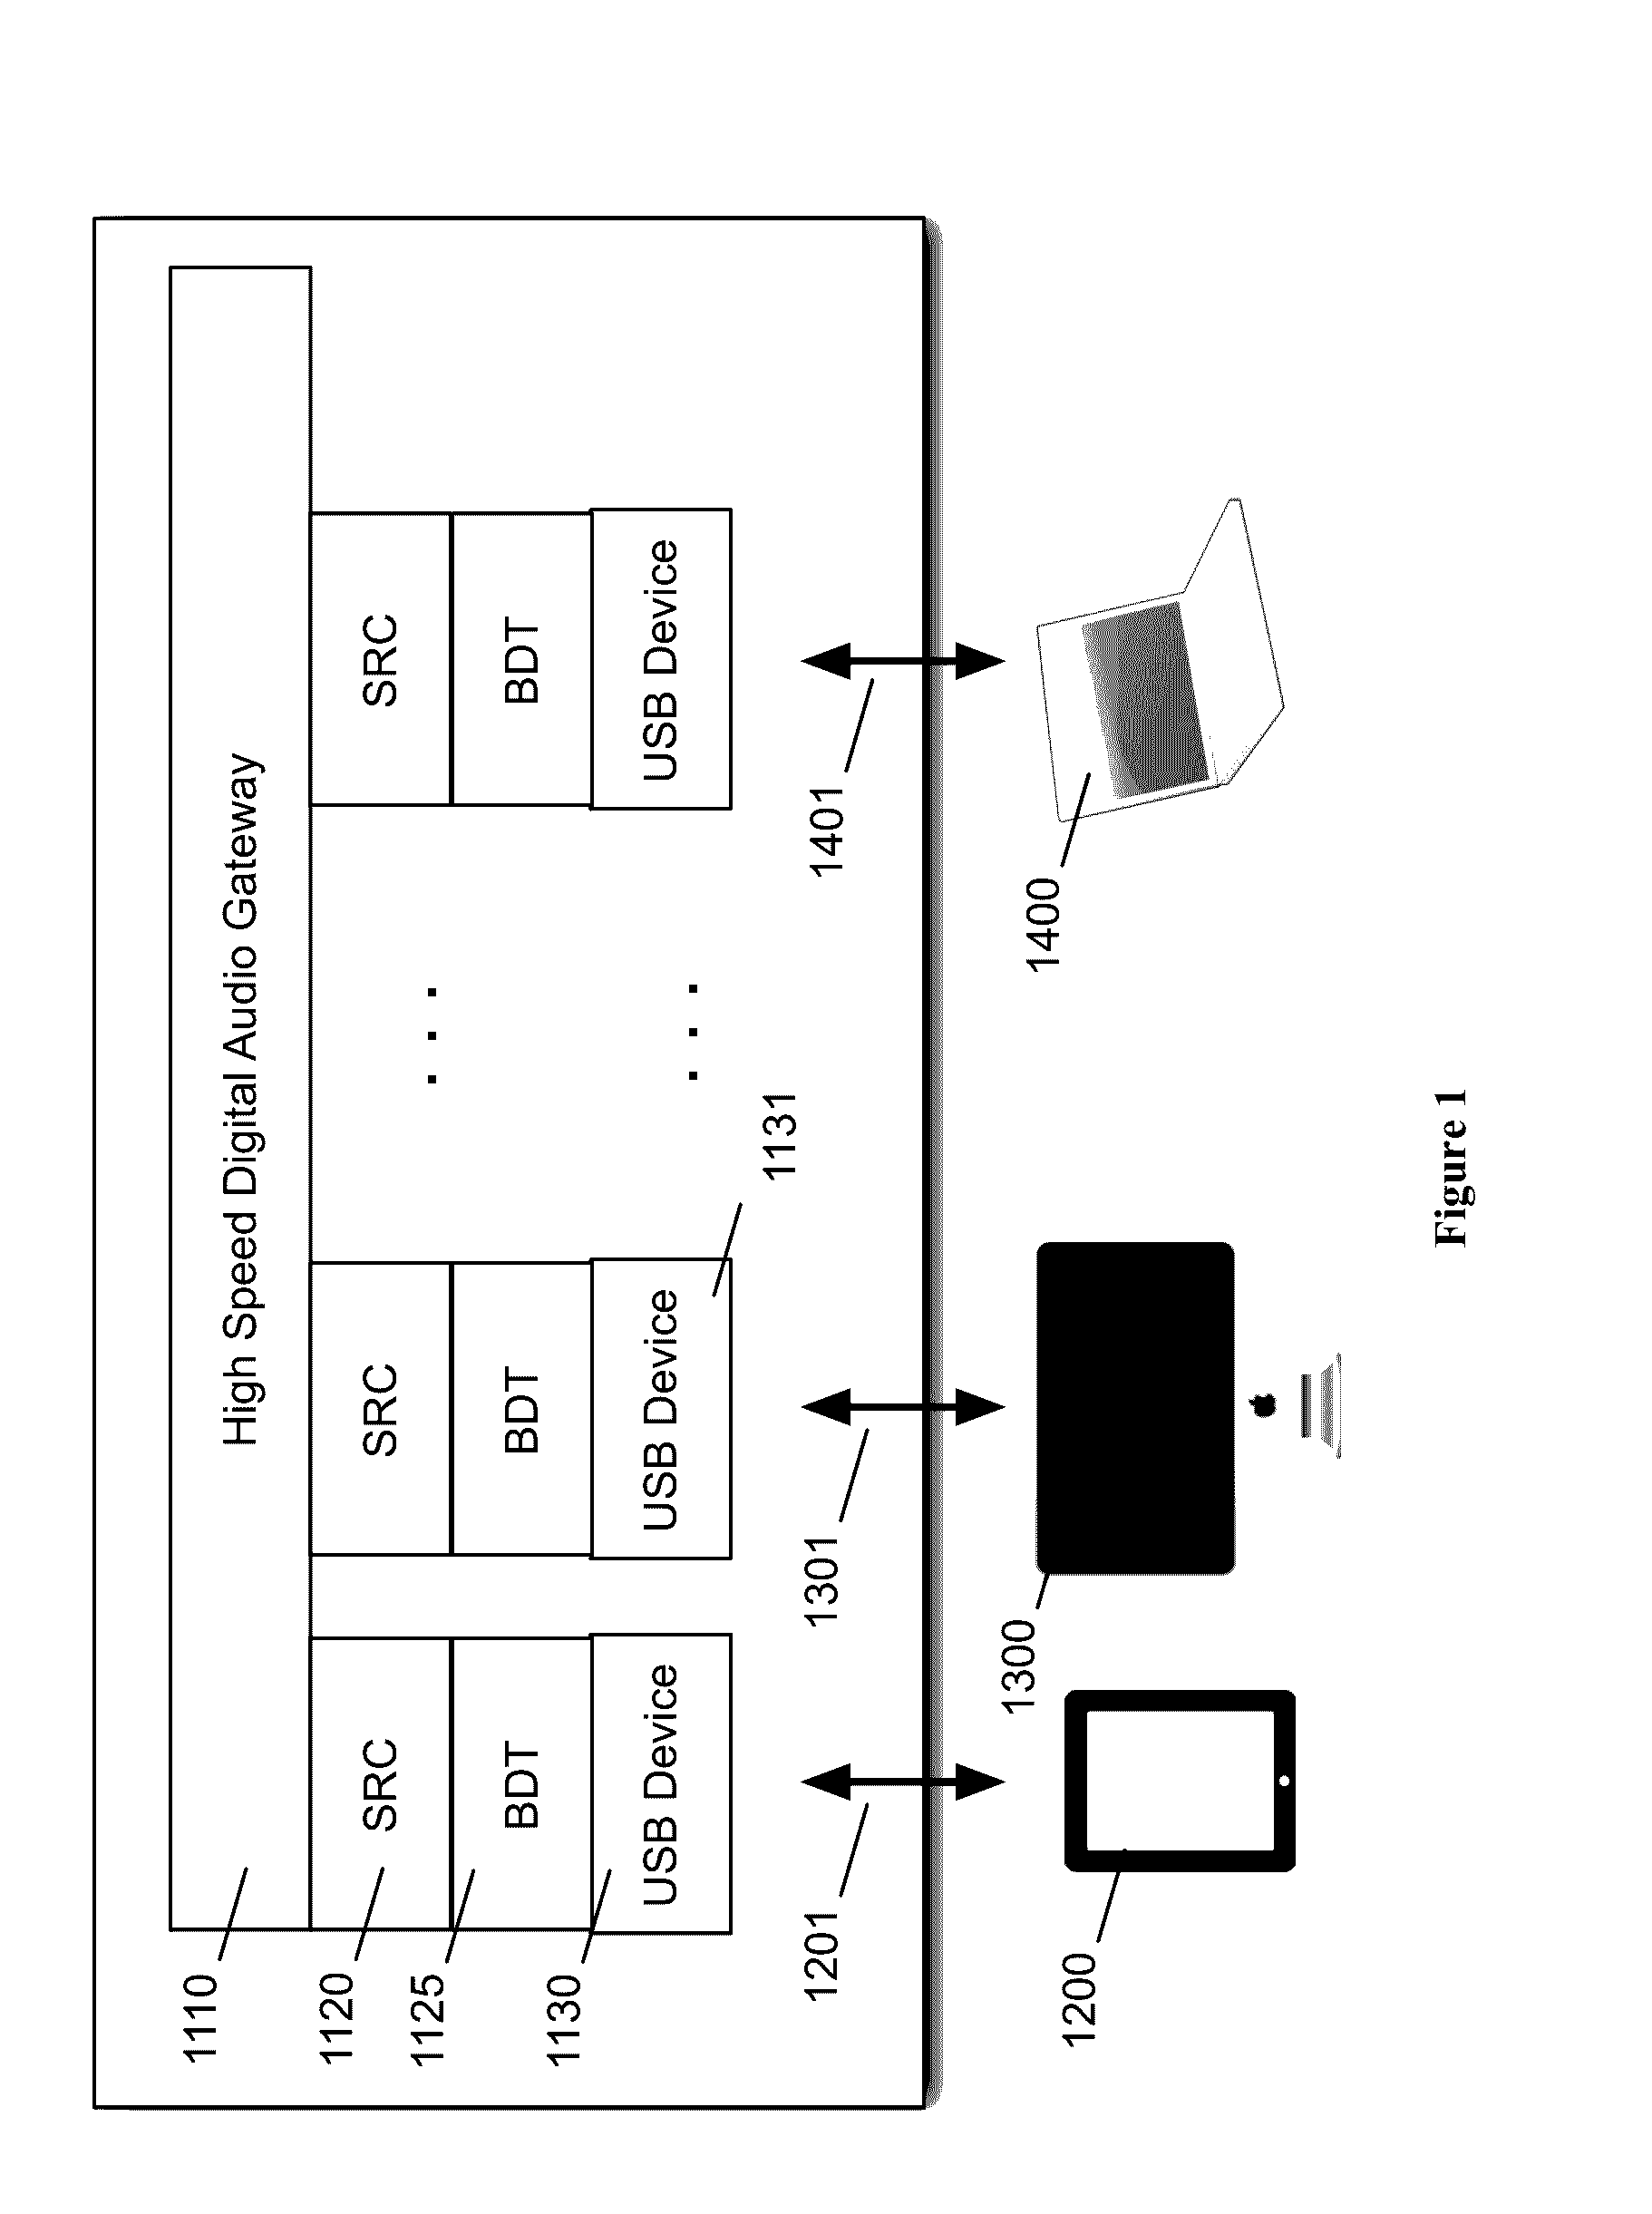 System and method for audio pass-through that has at least two USB ports between multiple host computing devices